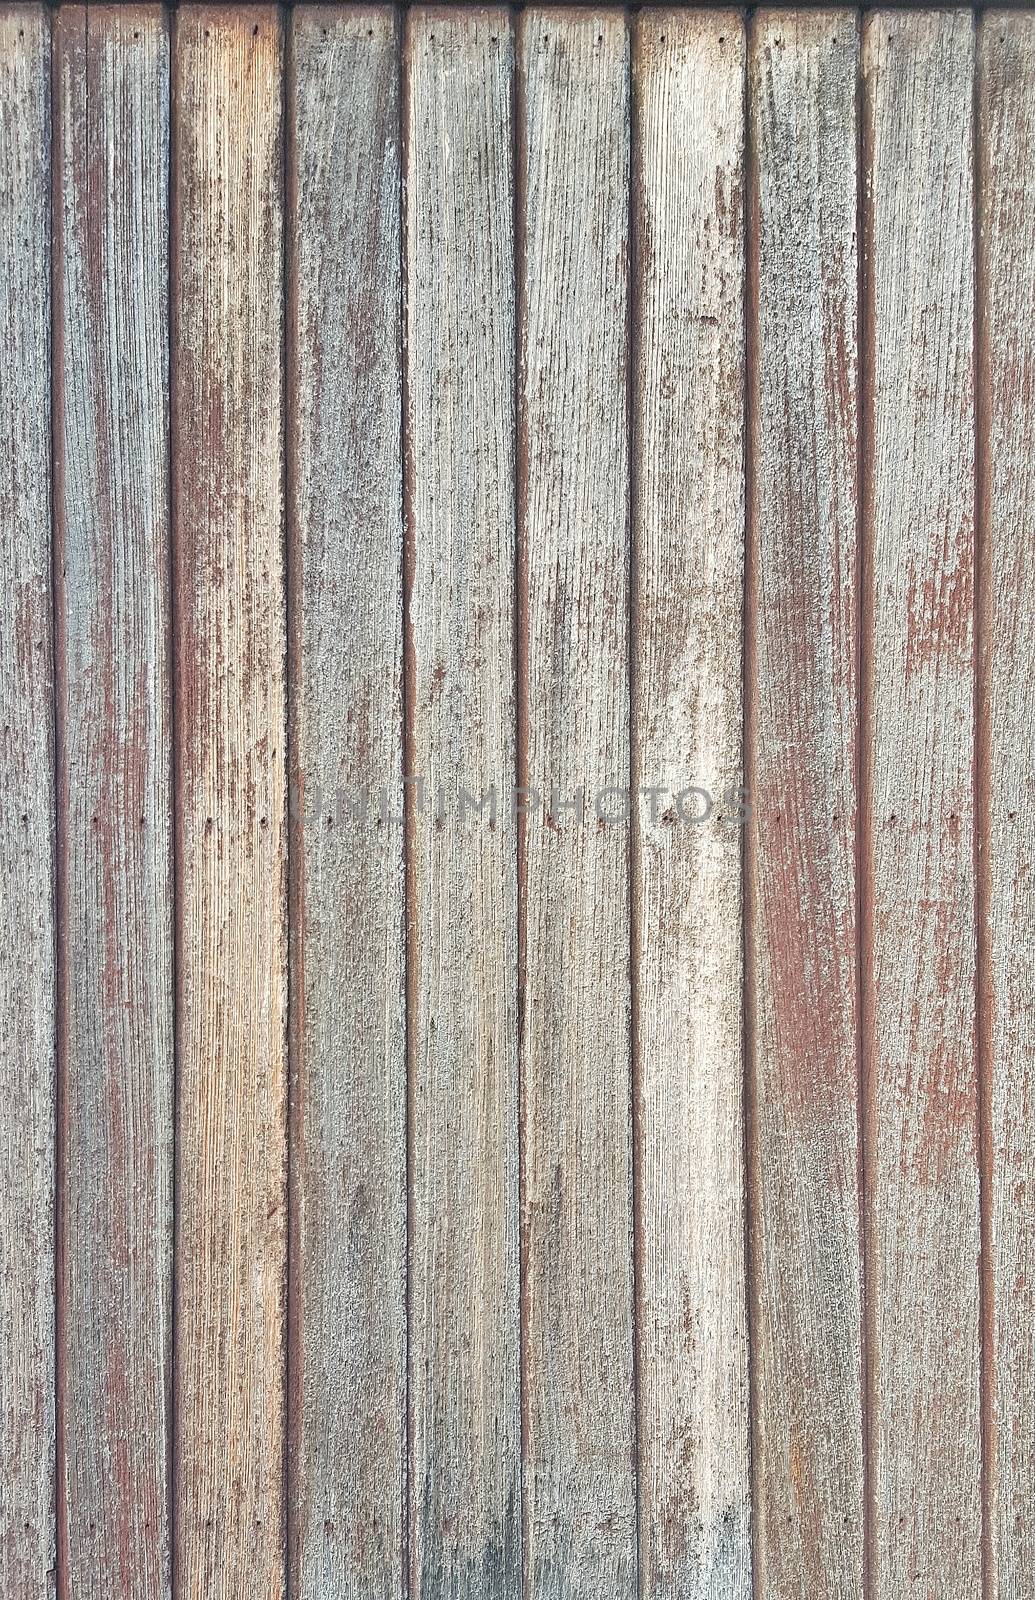 Rustic wooden background by thisboy